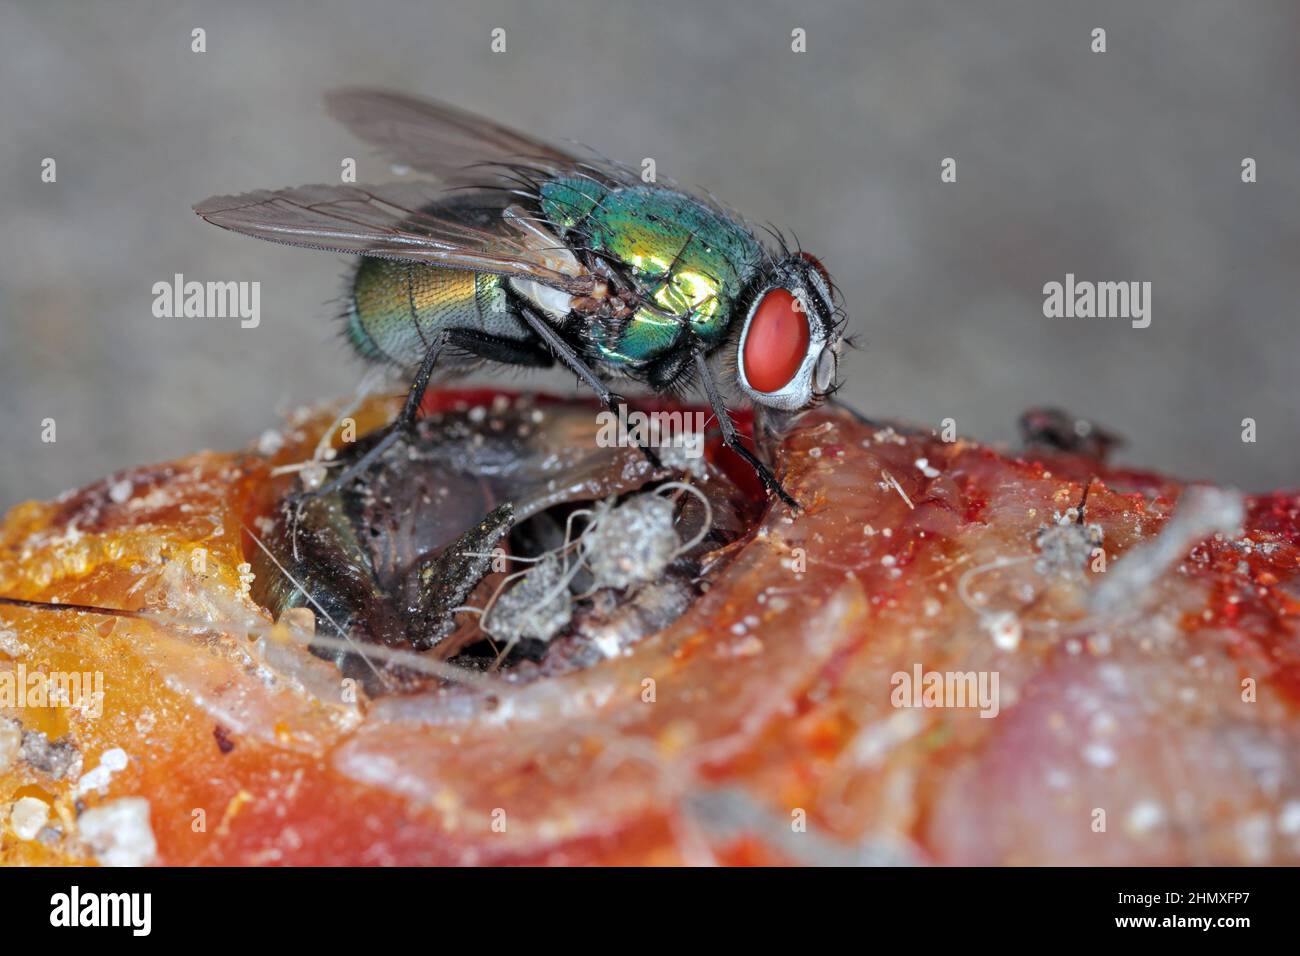 A fly on a dead fish. High magnification. Macro photo. Stock Photo